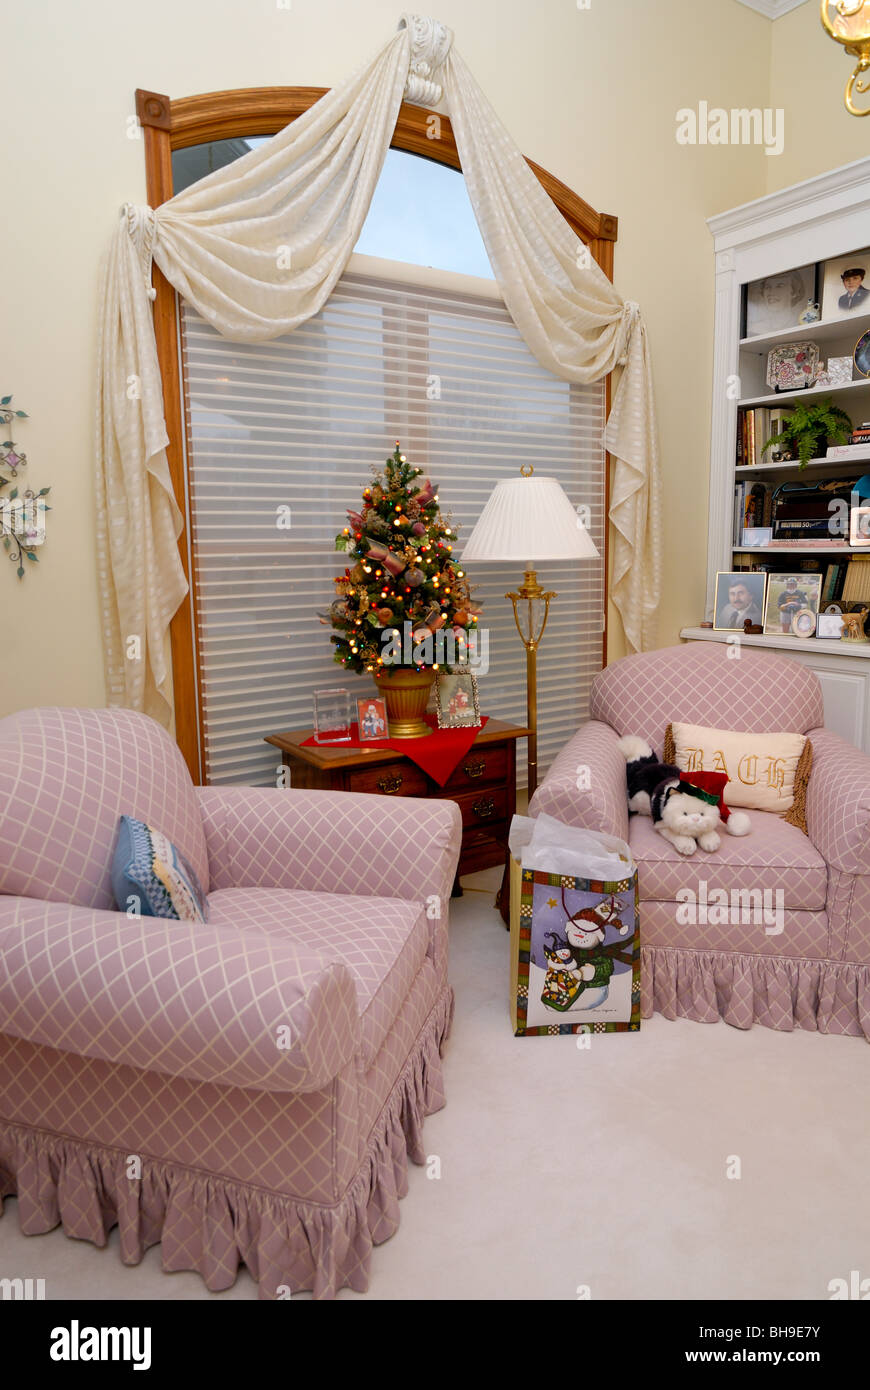 Two comforrtable chairs in the sitting room of a  tasteful home, decorated for the holiday season. Stock Photo